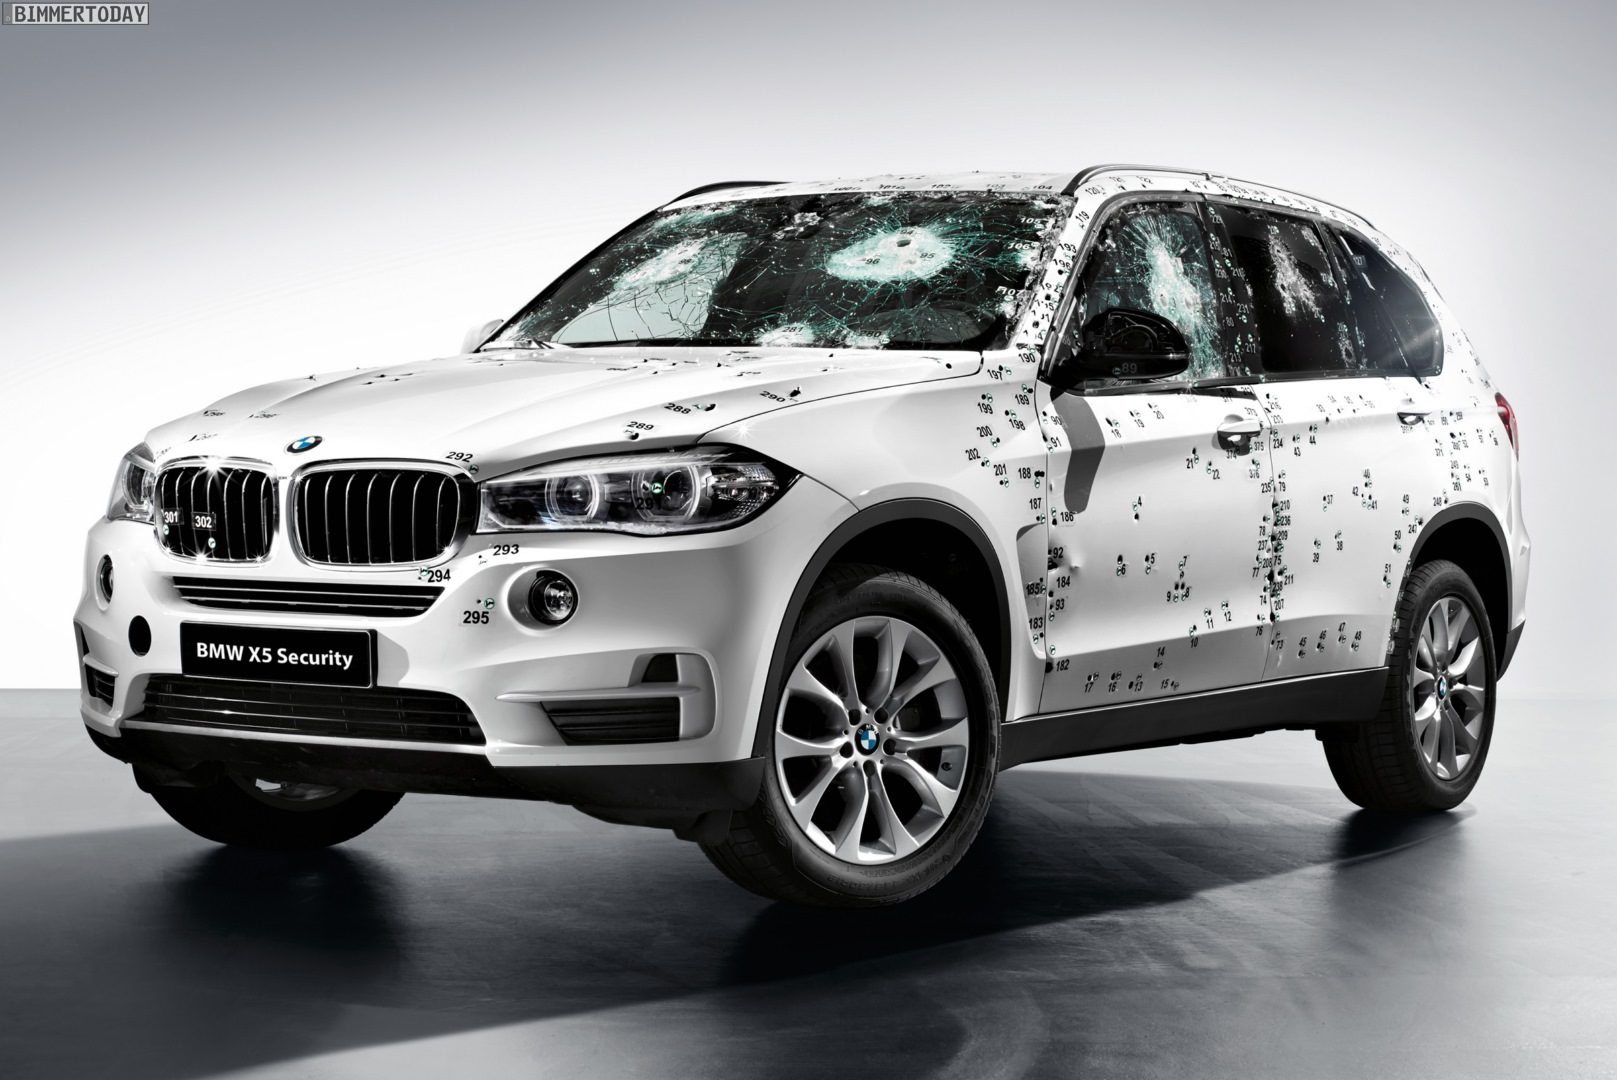 F15 BMW X5 Security Plus To Be Unveiled at 2014 Moscow Auto Show